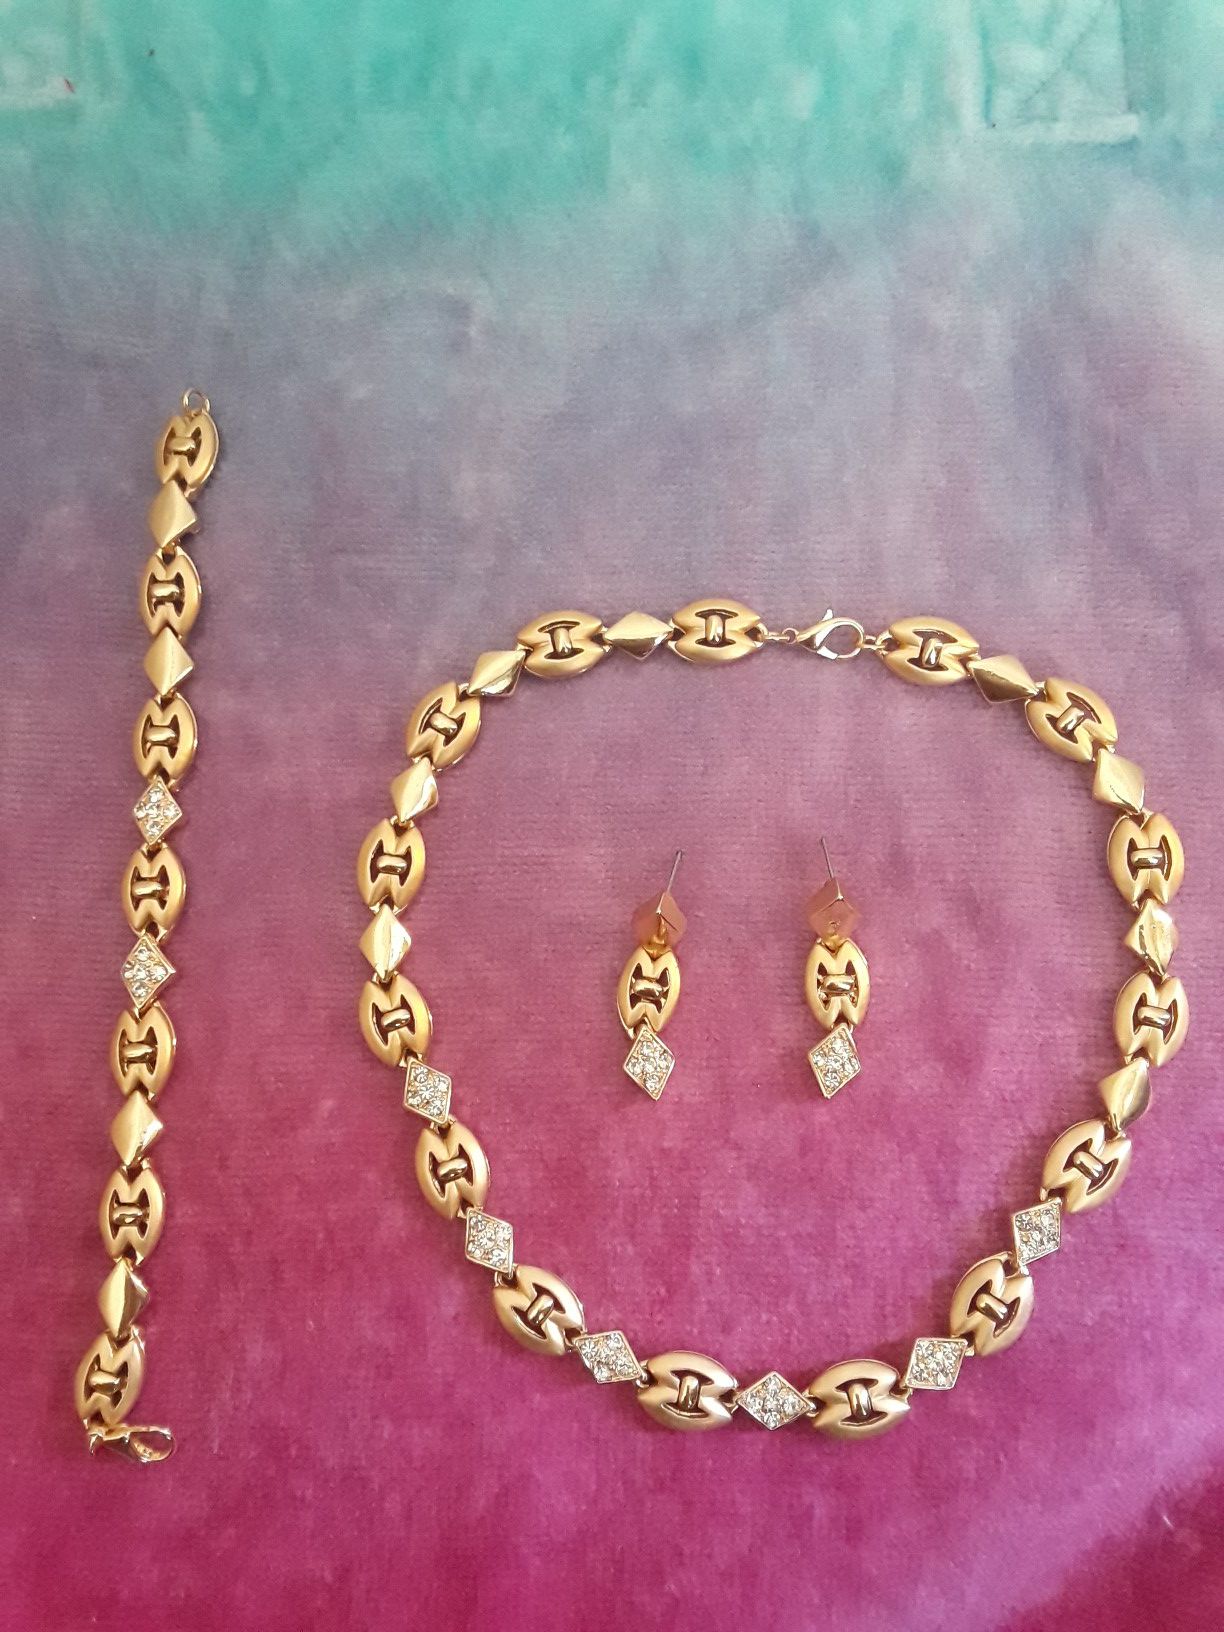 .$60 I DELIVER⚘💎💎⚘14kt Gold plated  necklace with matching earrings and bracelet will not fade or tarnish